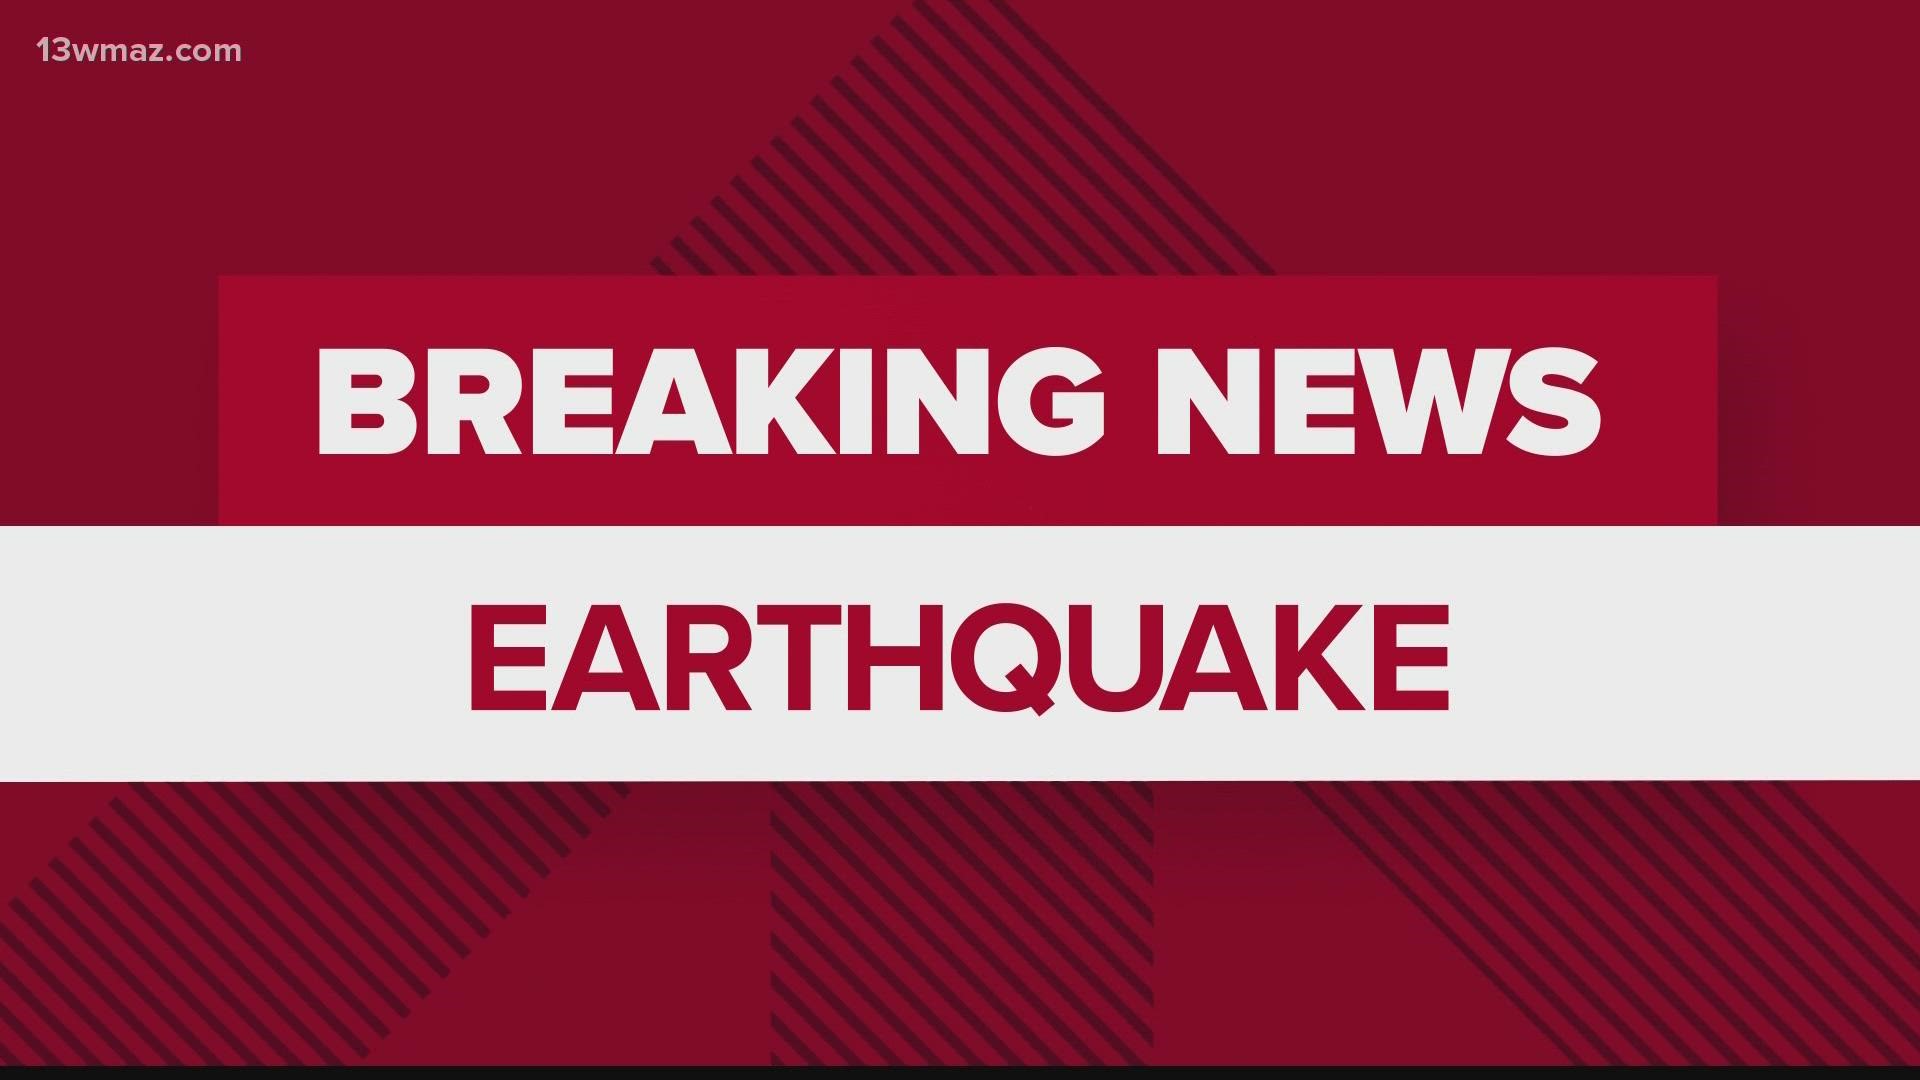 A magnitude 6.4 earthquake struck northern California just after 2:30 a.m. local time.